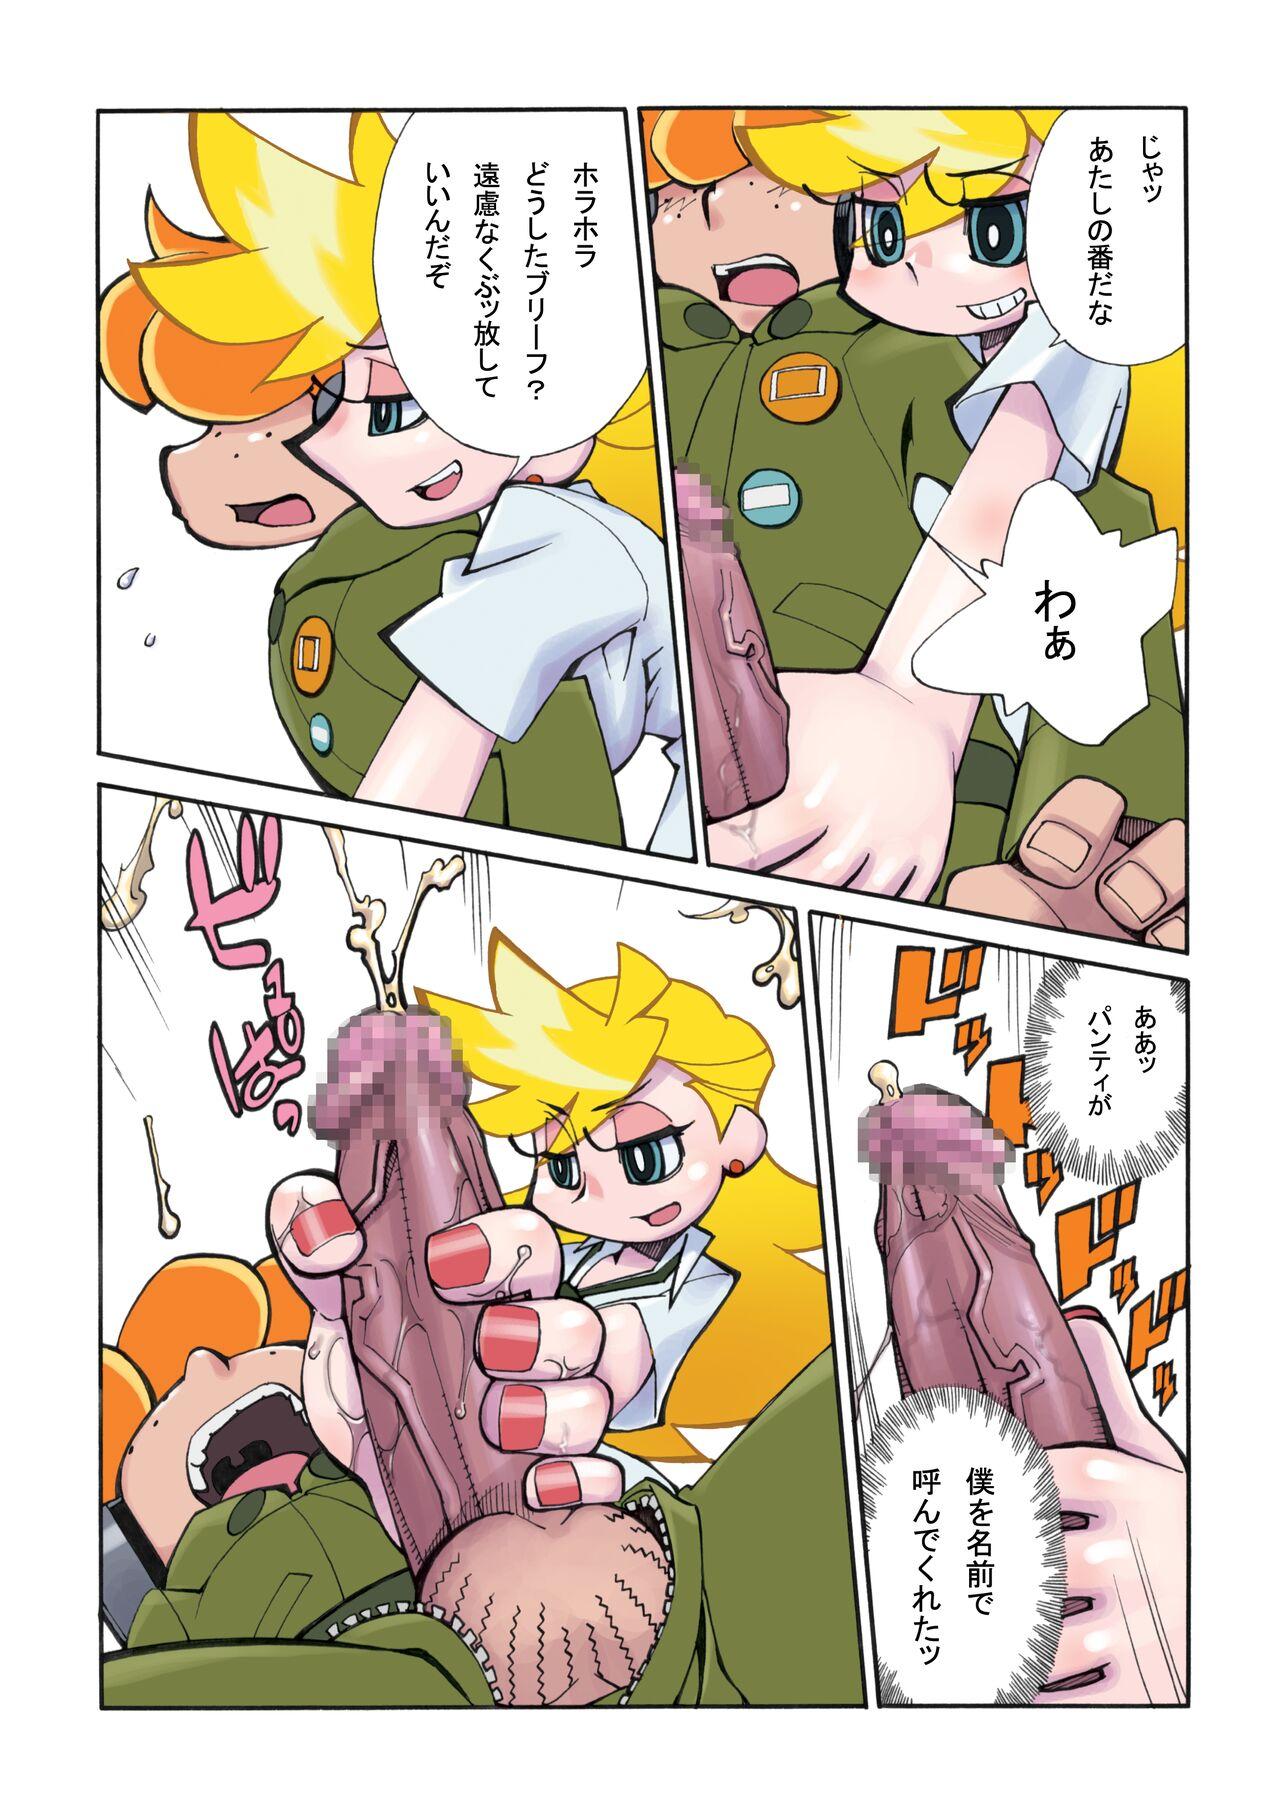 Reality PT&NS - Panty and stocking with garterbelt Fodendo - Page 5